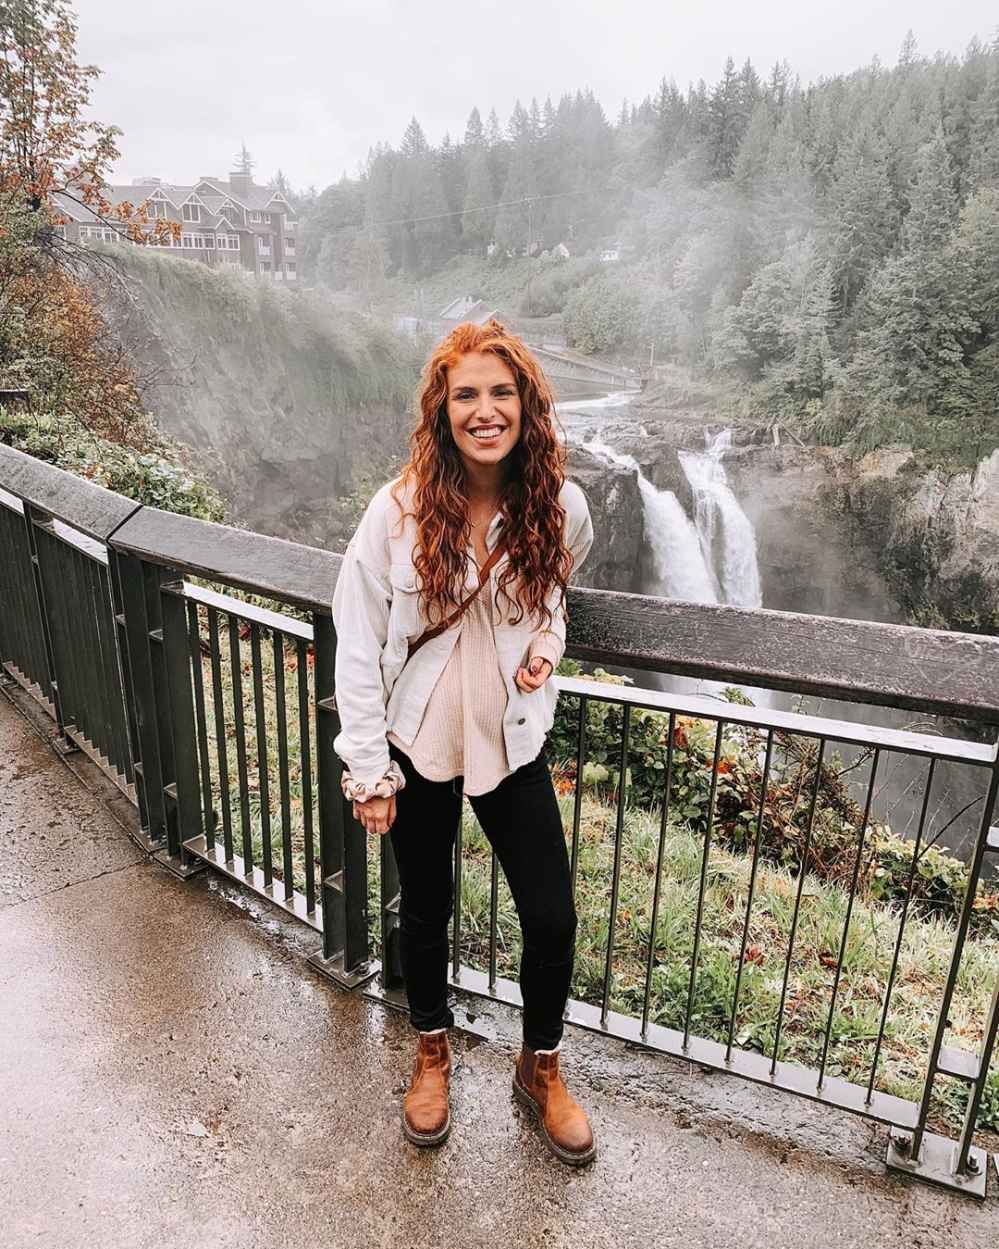 Audrey Roloff Poses With Newborn and Daughter, Admits Postpartum Recovery ‘Has Been Hard’